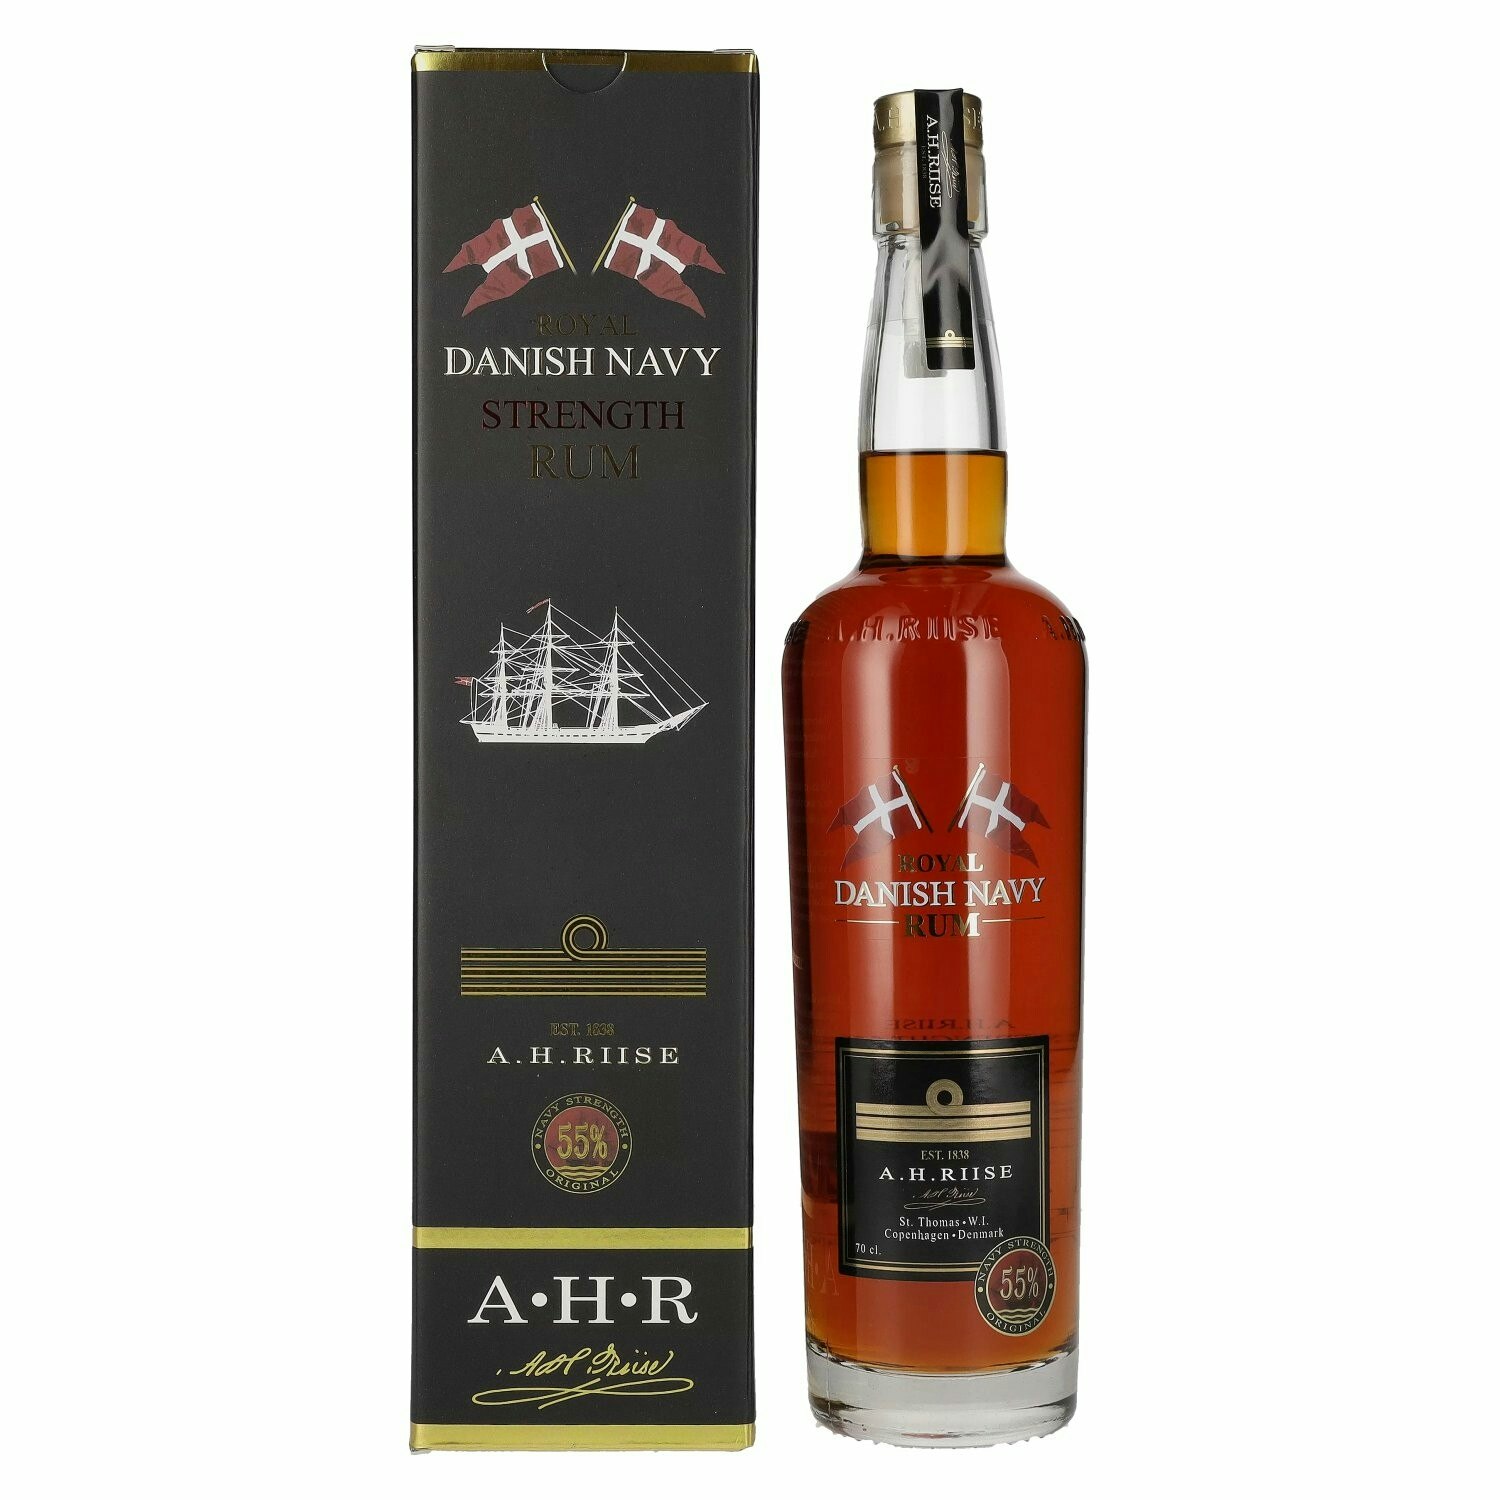 A.H. Riise Royal DANISH NAVY STRENGTH Rum - Old Edition 55% Vol. 0,7l in Giftbox